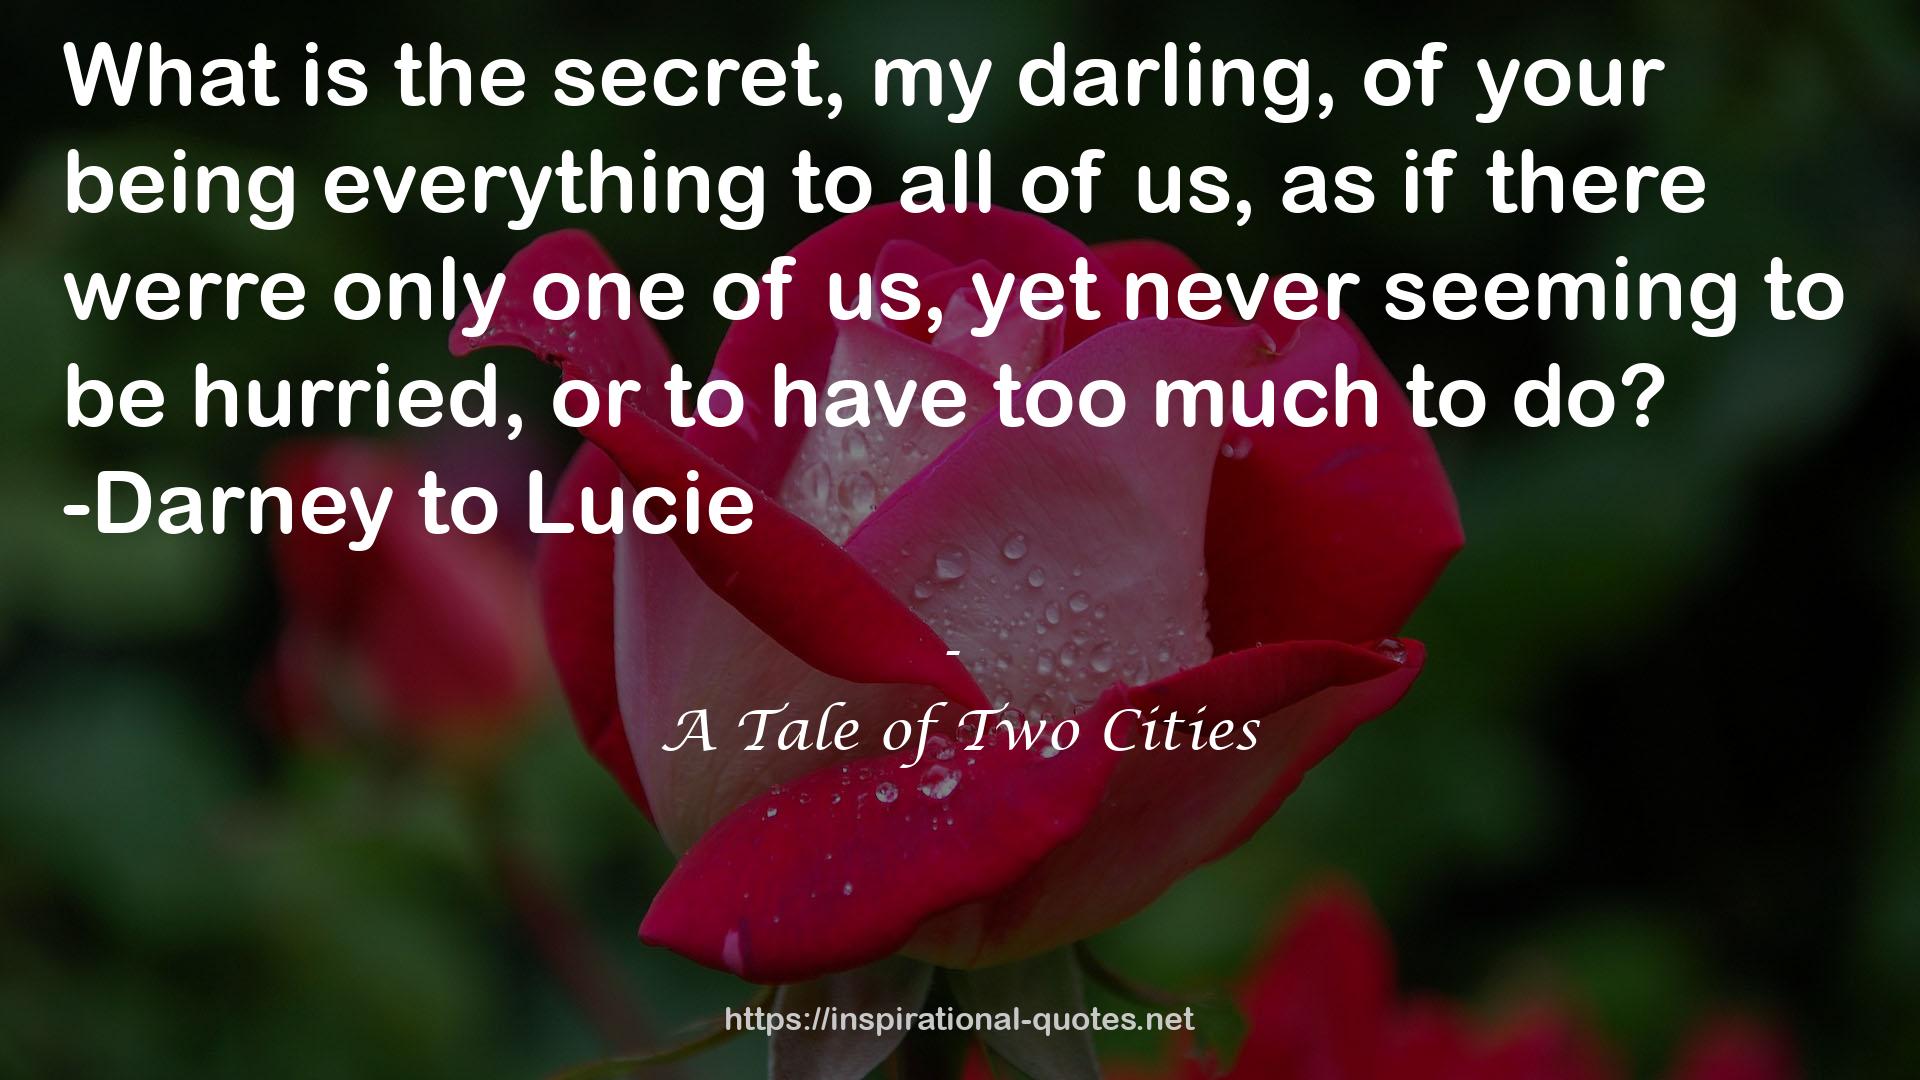 A Tale of Two Cities QUOTES